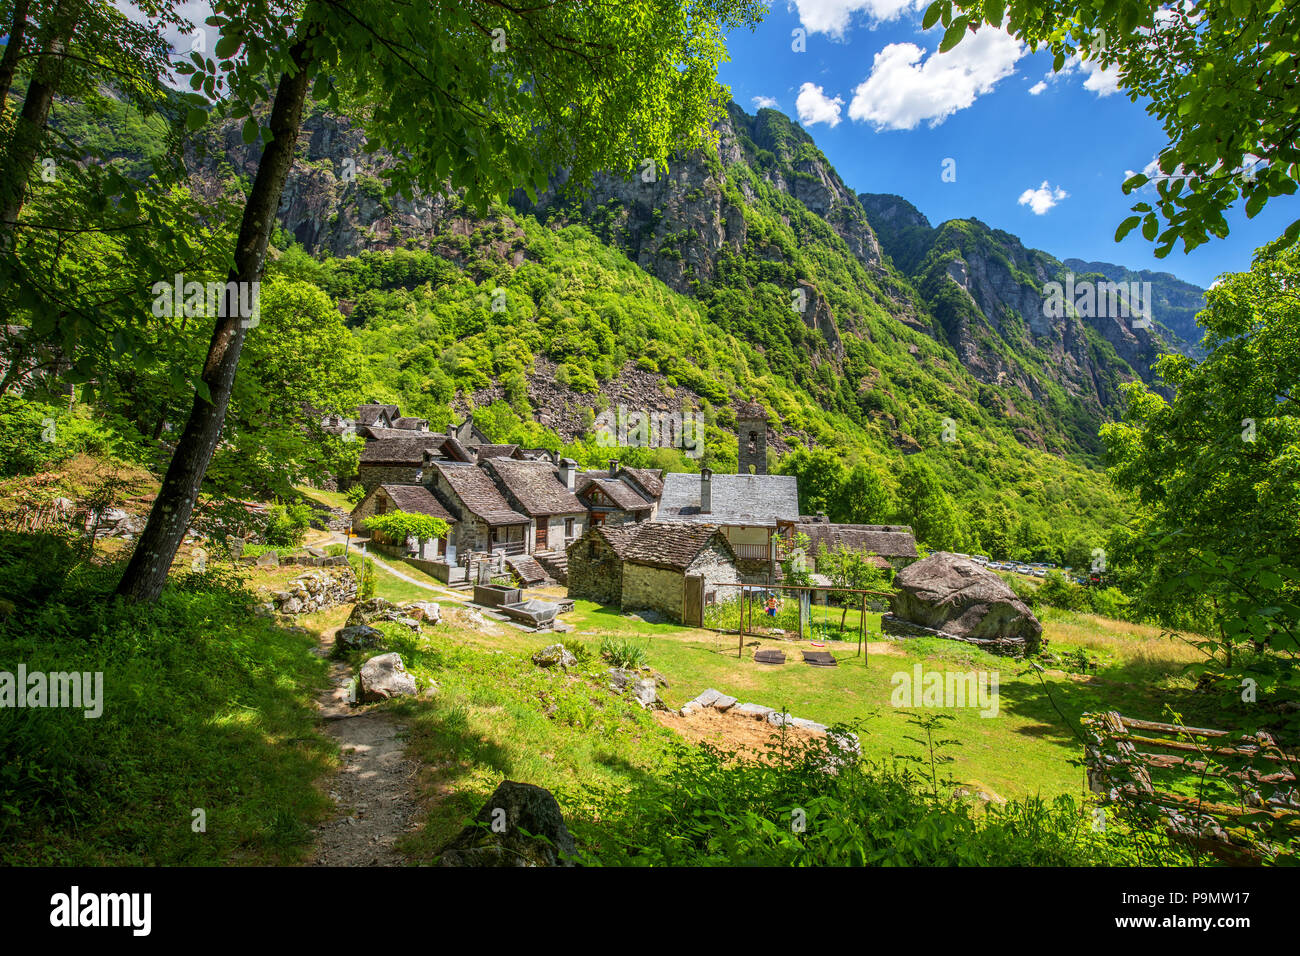 Forogio village with typical stone houses and Swiss Alps, Bavona valley, Canton Ticino, Switzerland, Europe. Stock Photo